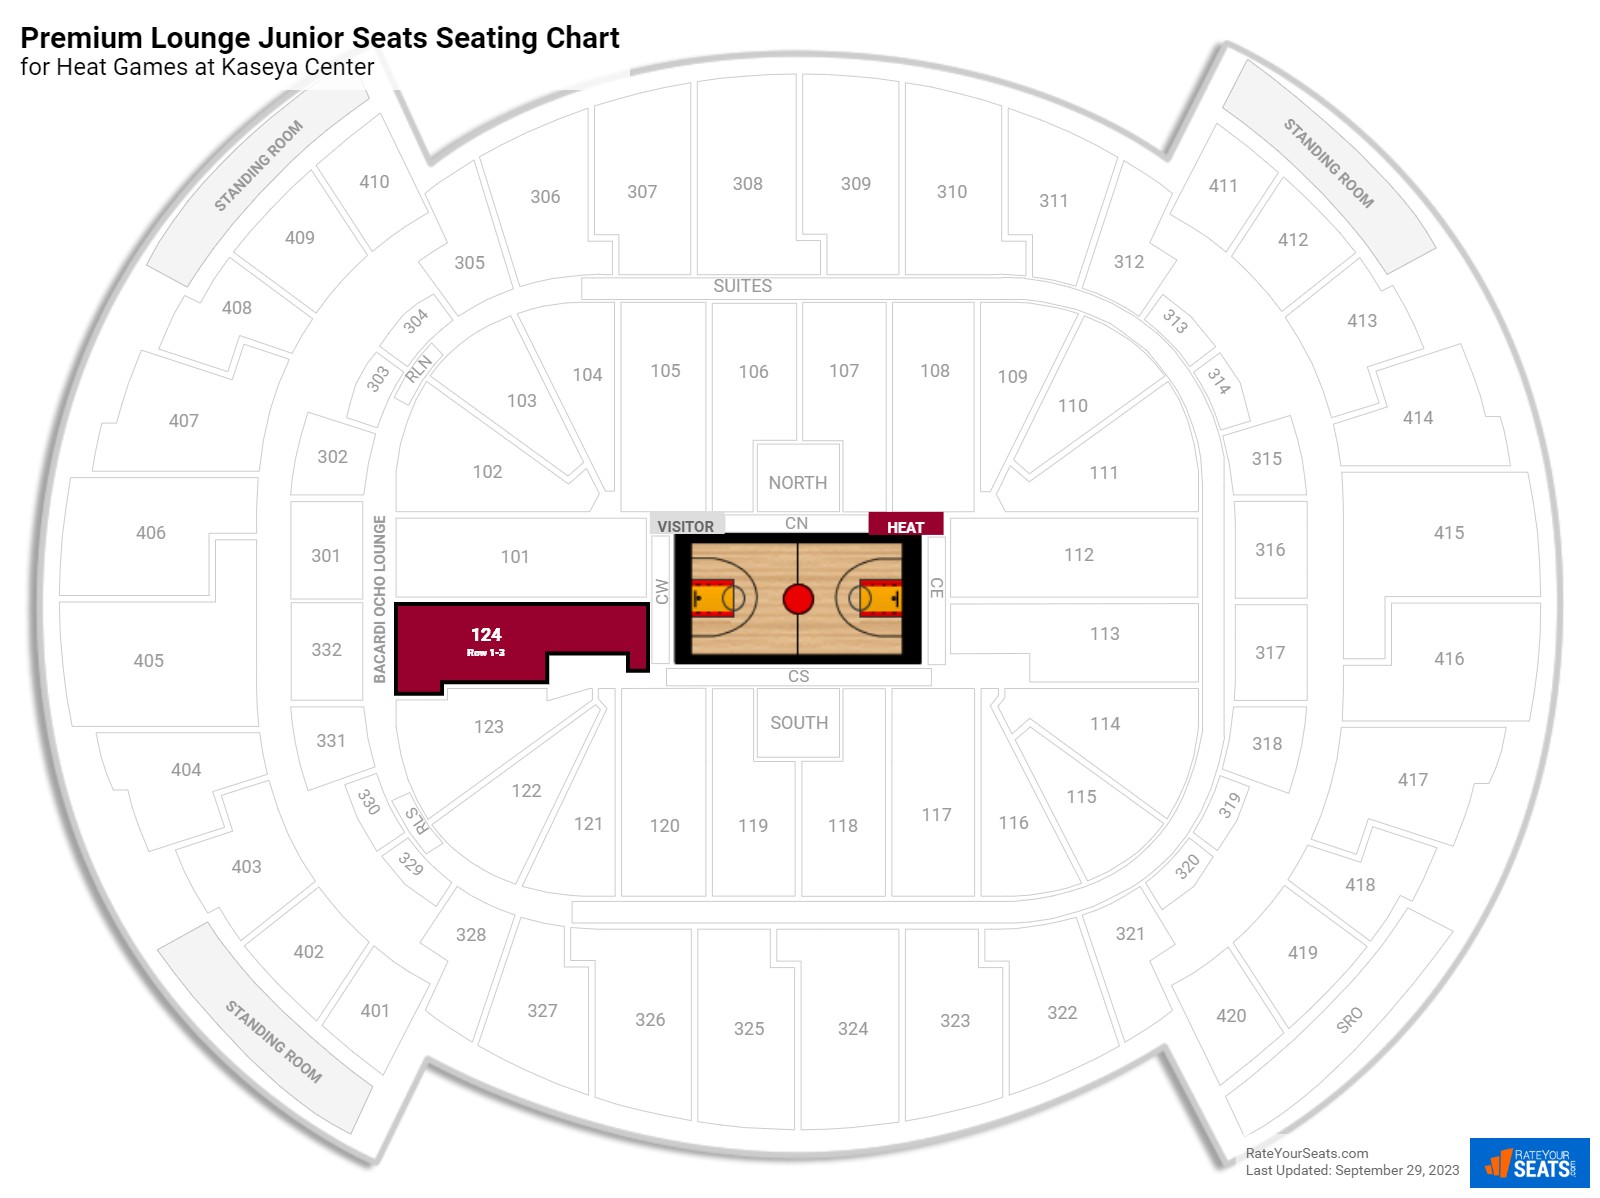 Heat AmericanAirlines Lounge Junior Seats Seating Chart at FTX Arena